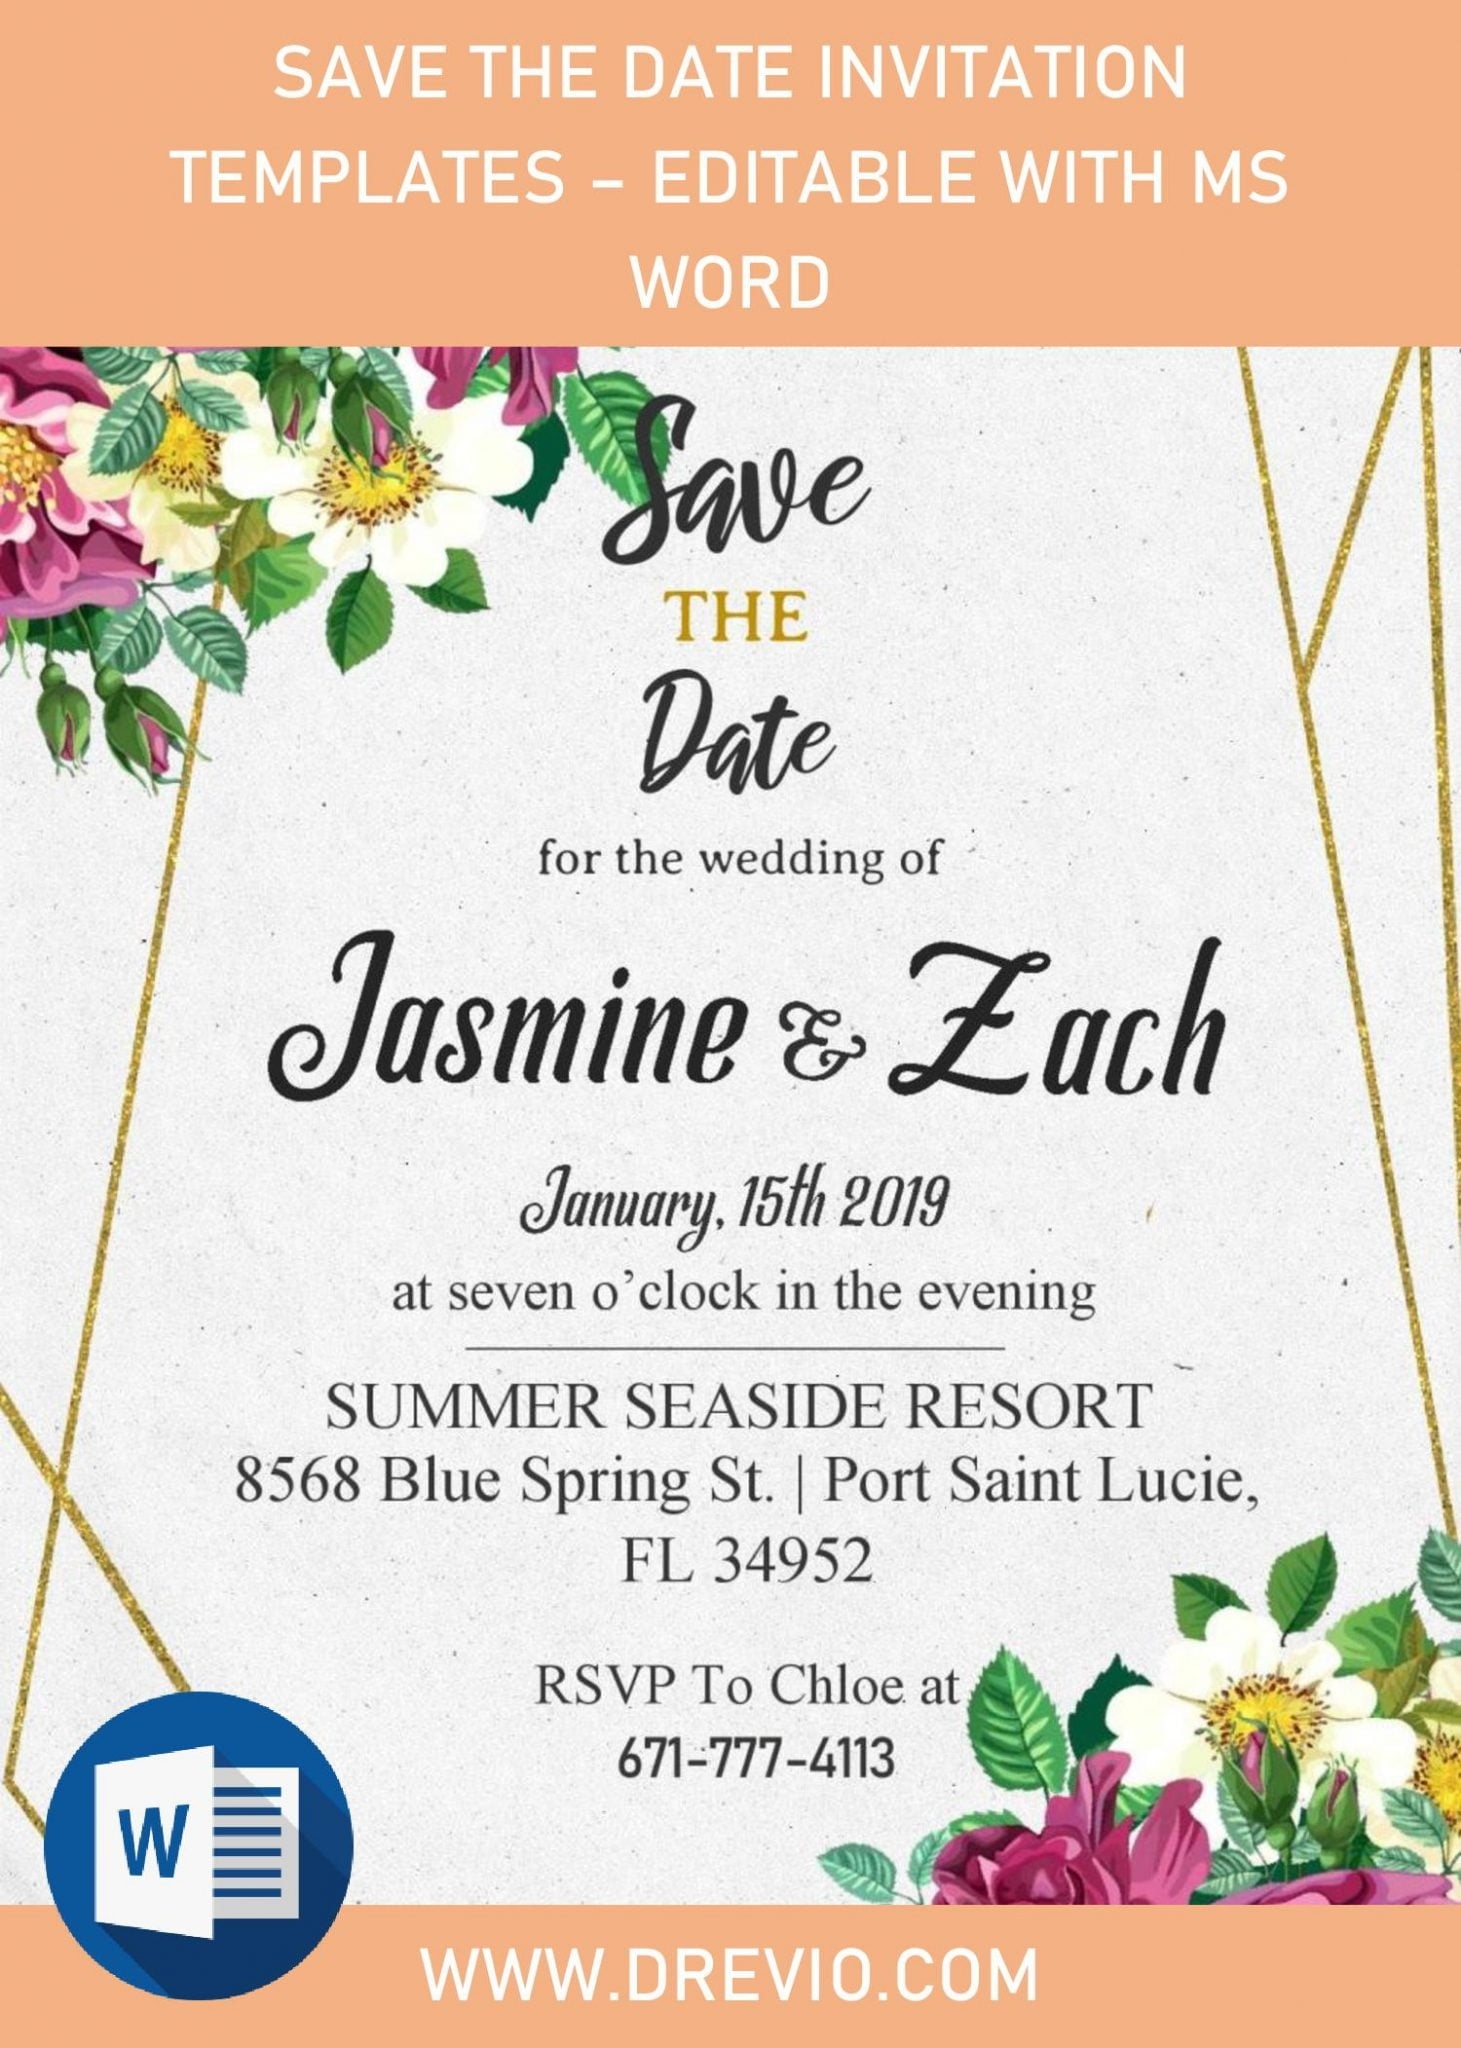 Save The Date Invitation Templates – Editable With Ms Word | Download Regarding Save The Date Templates Word